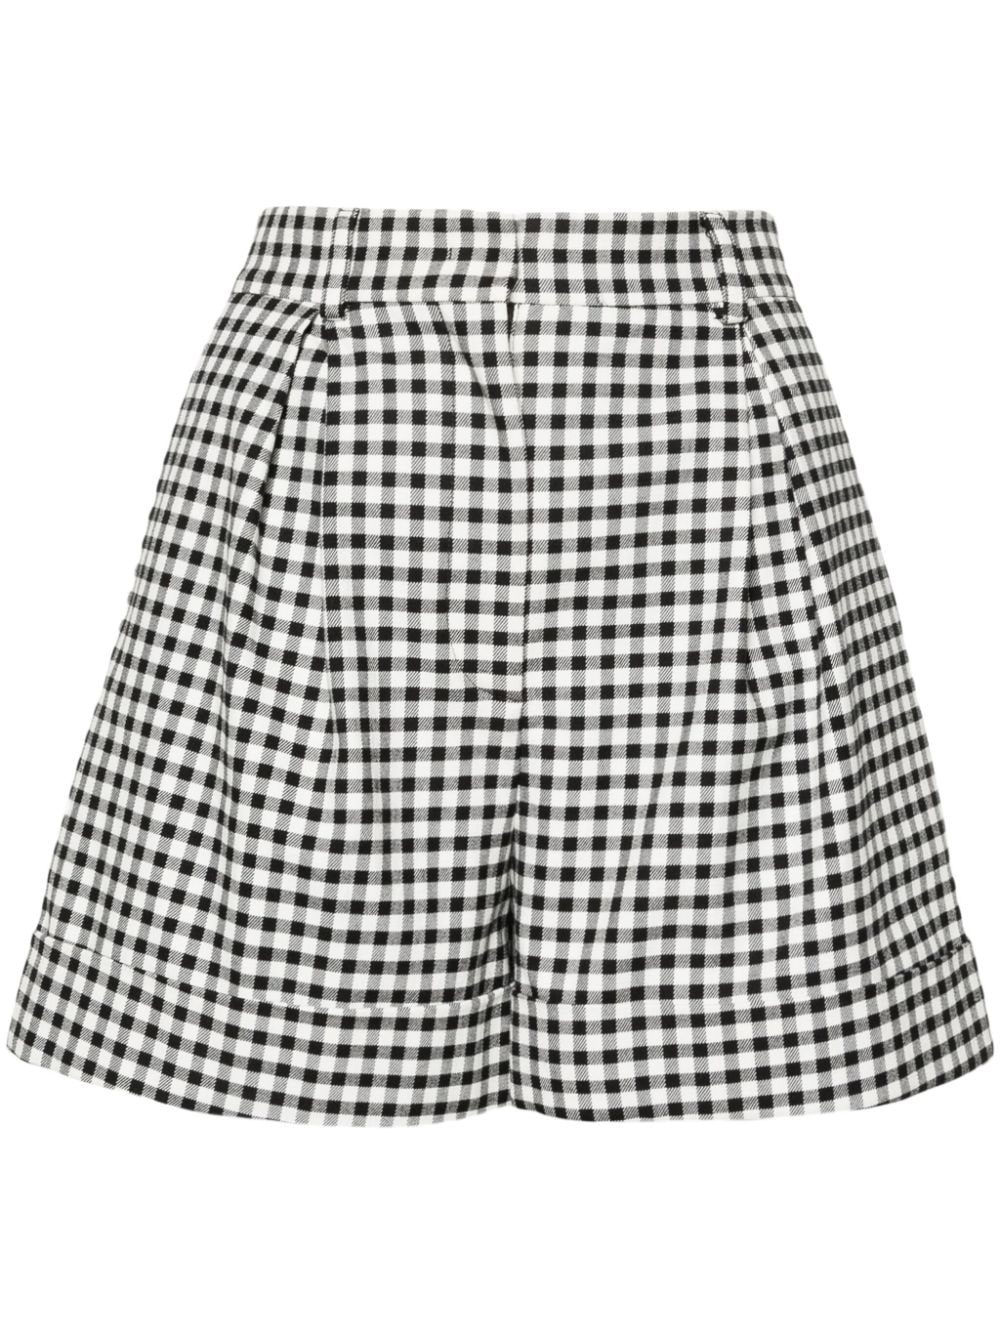 gingham-check tailored shorts - 1